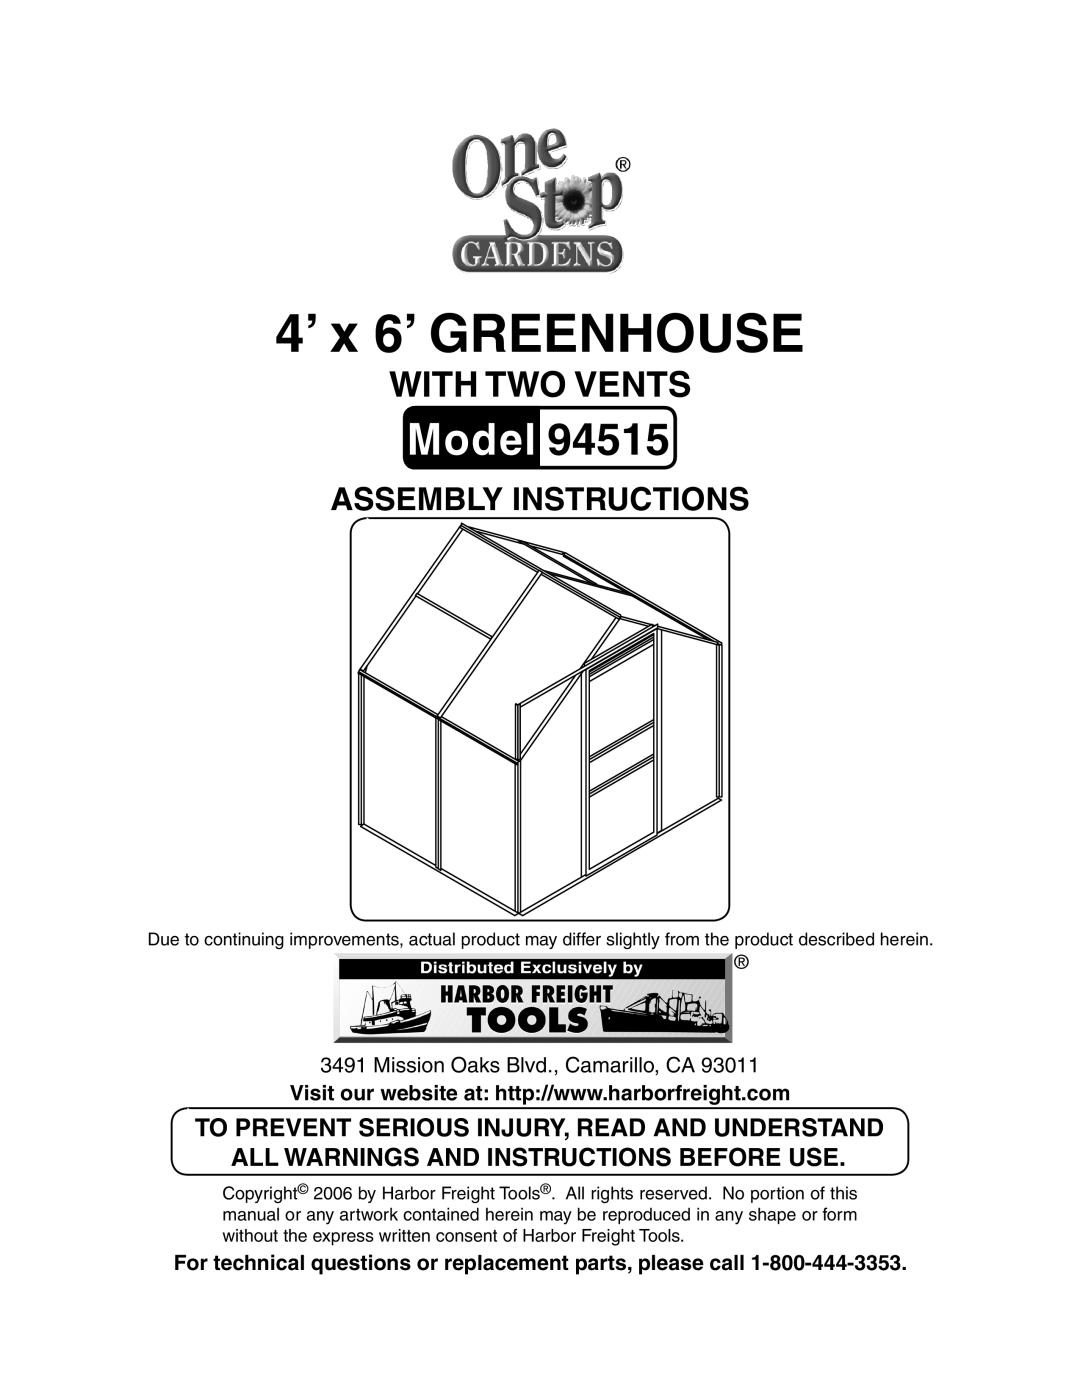 Harbor Freight Tools 94515 manual 4’ x 6’ GREENHOUSE, To prevent serious injury, read and understand, Model 